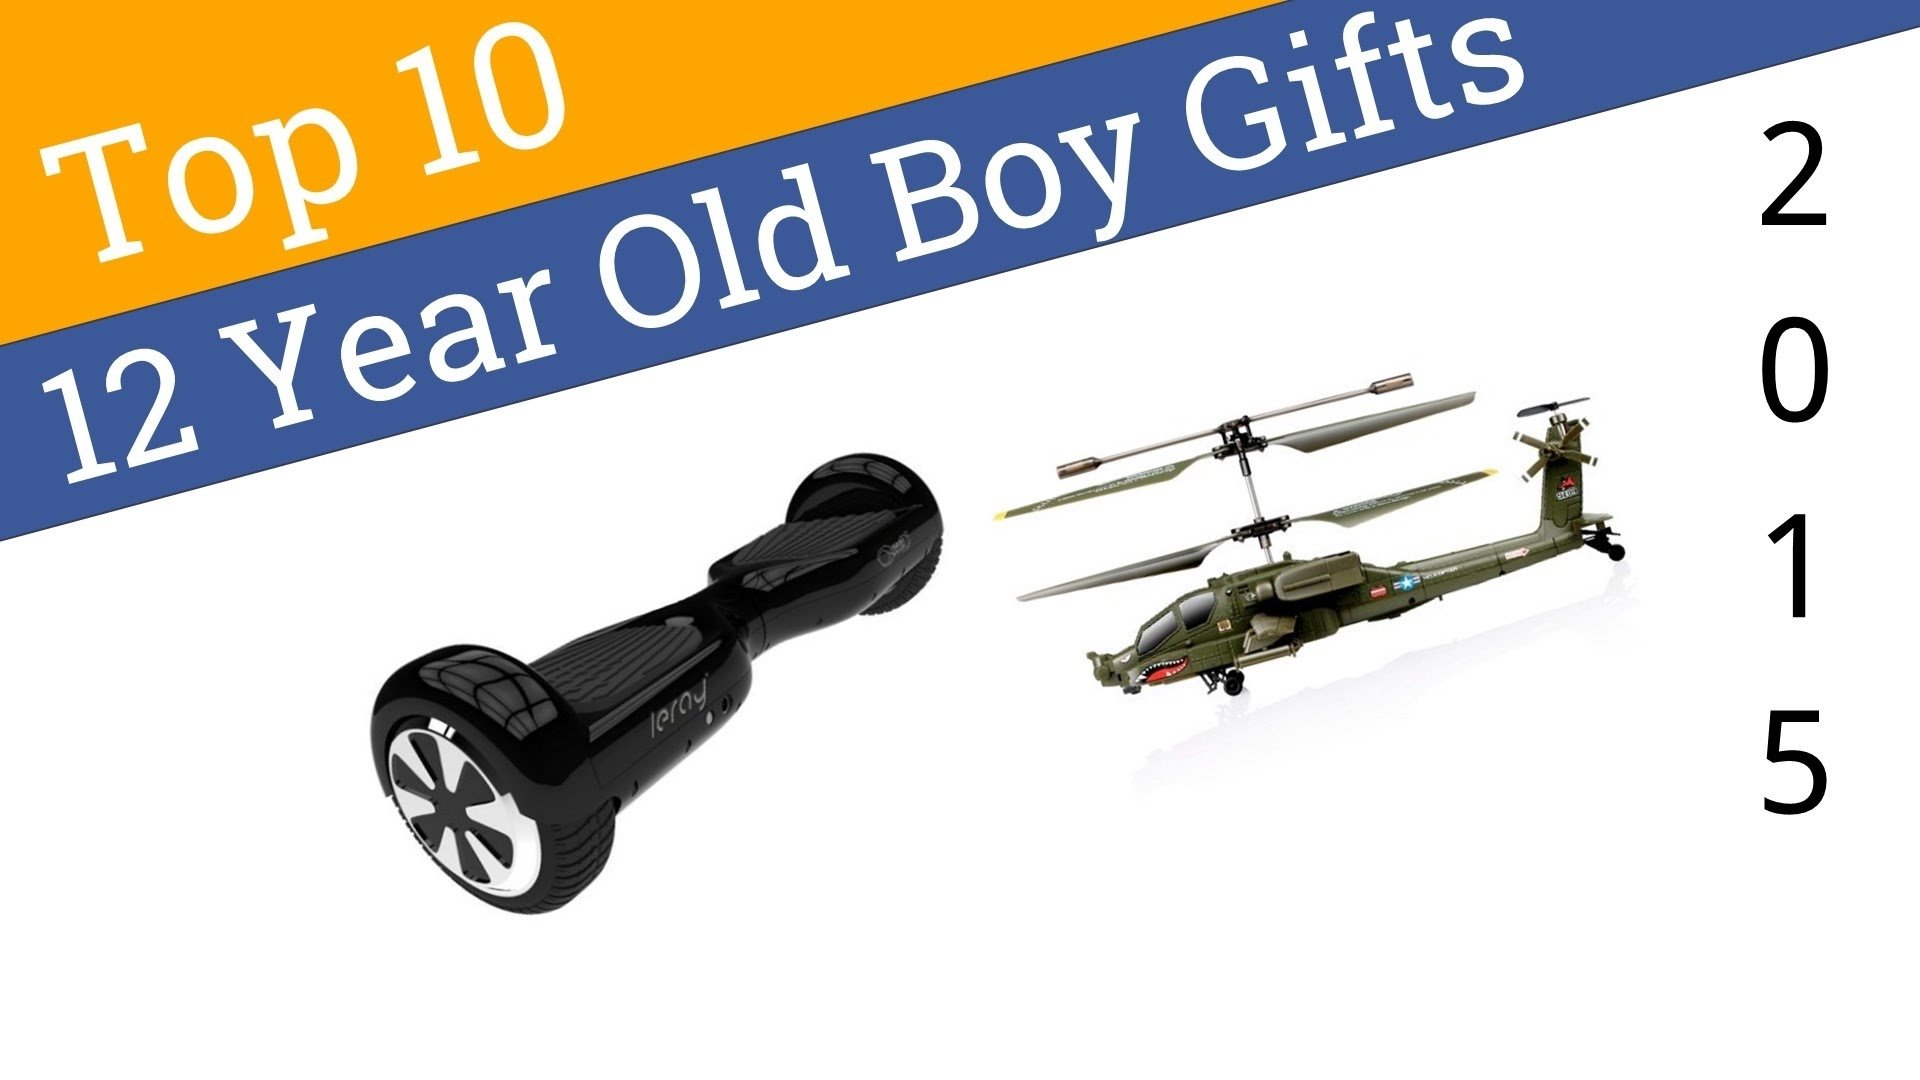 10 Famous Gift Ideas For 12 Year Old Boy 10 best 12 year old boy gifts 2015 youtube 2 2022